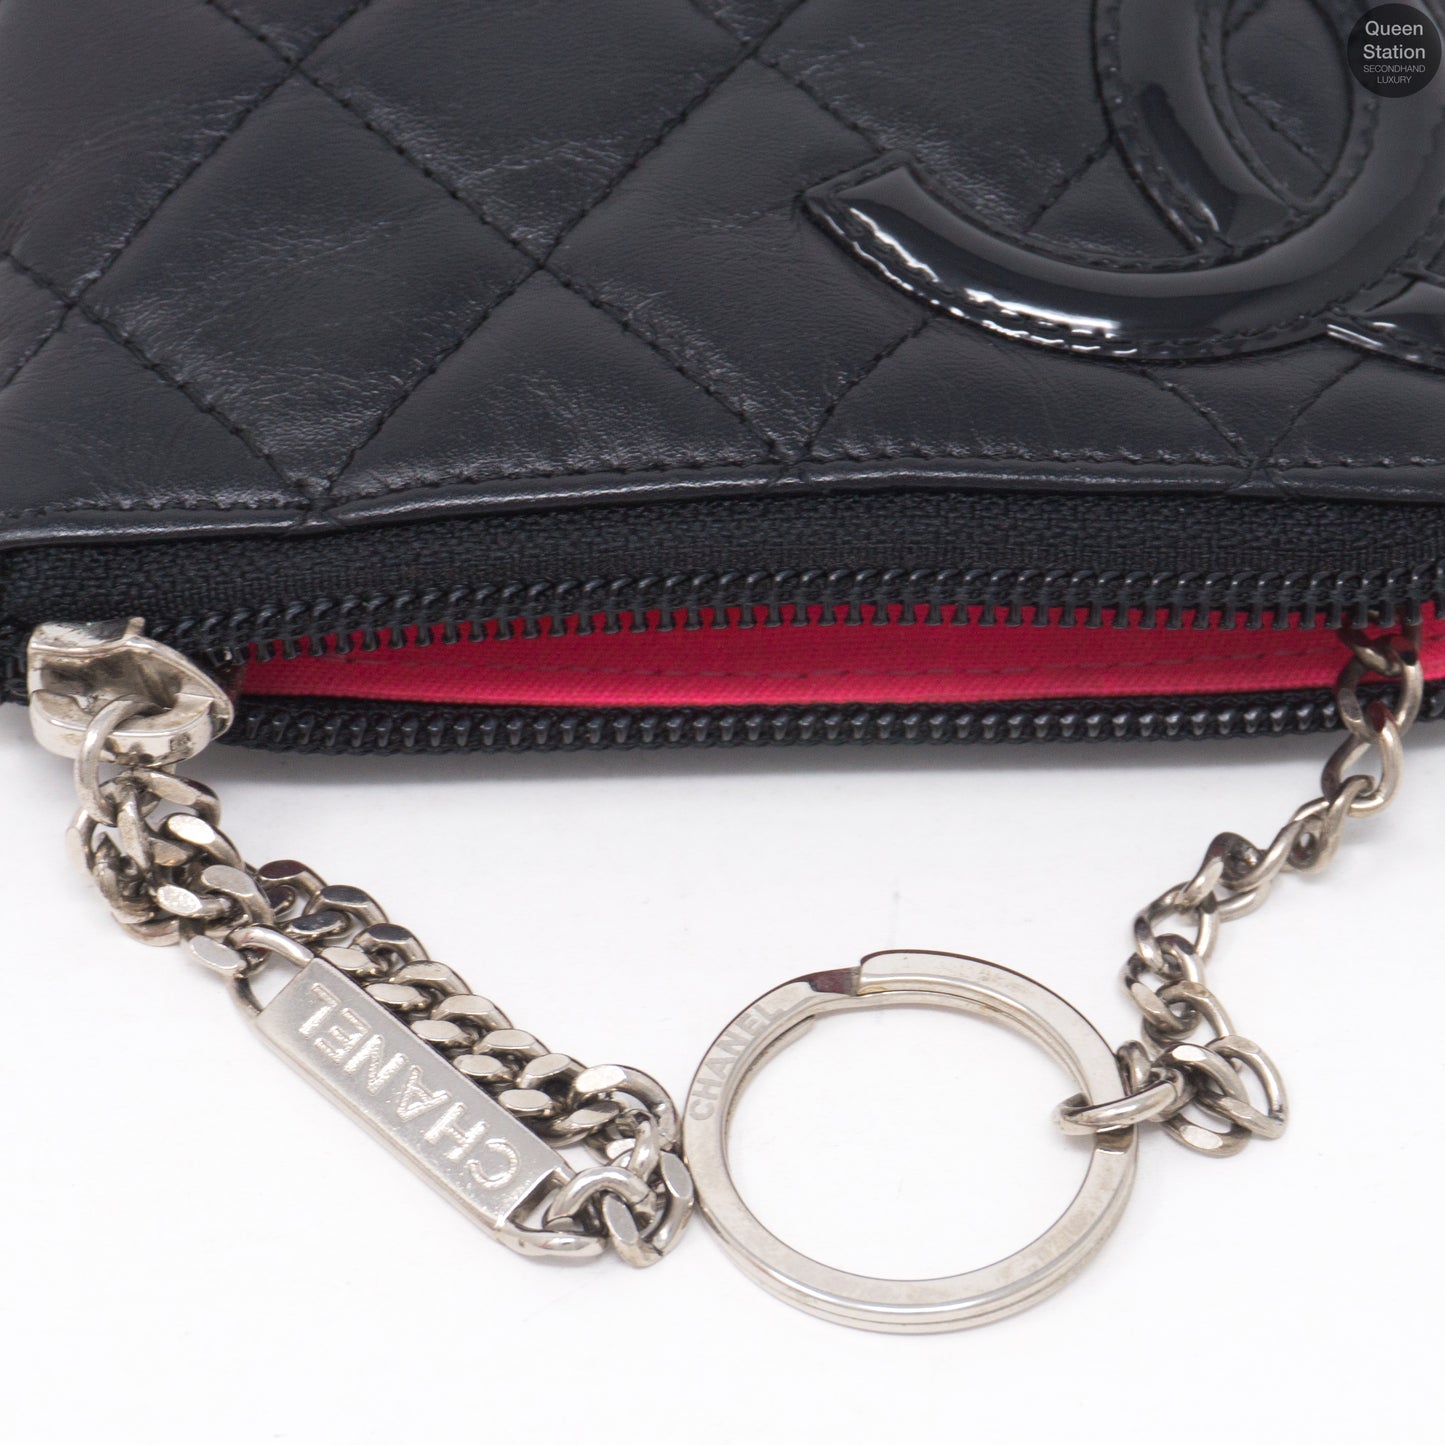 Cambon Leather Key Pouch